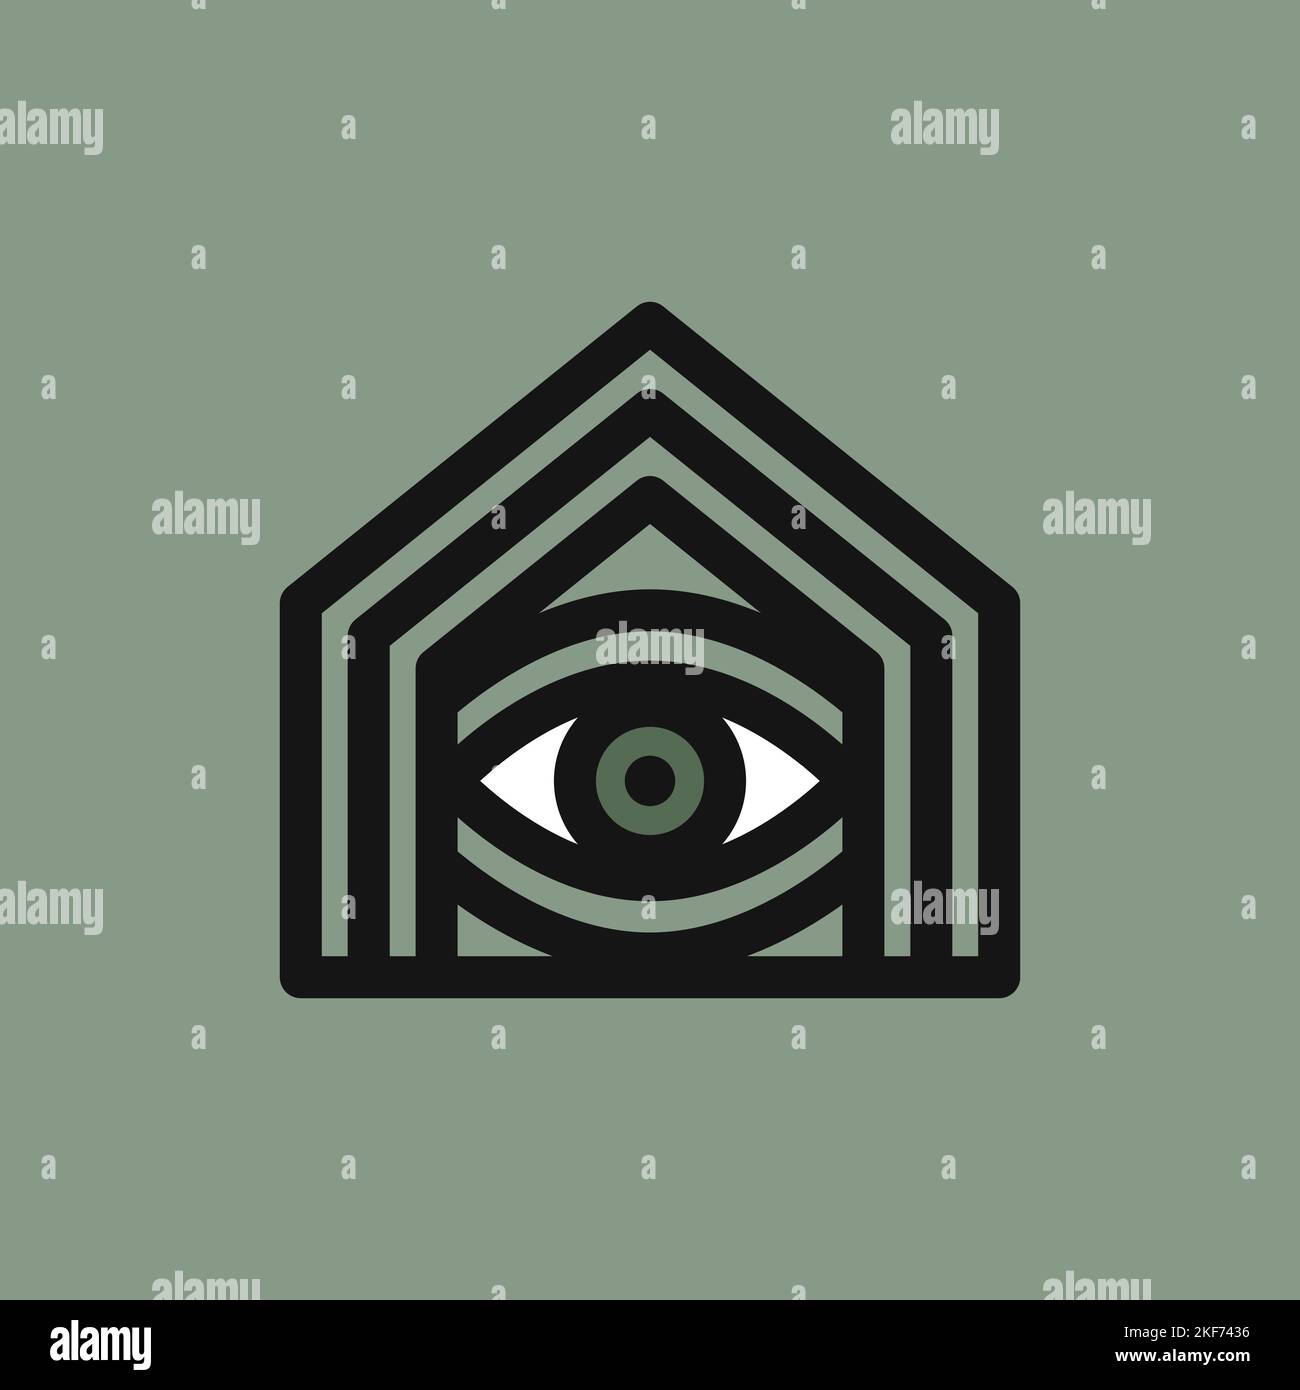 Outline eye and house icon vector. Illustration in minimal geometric line style. Open eyes symbol concept of security company, supervision, searching Stock Vector